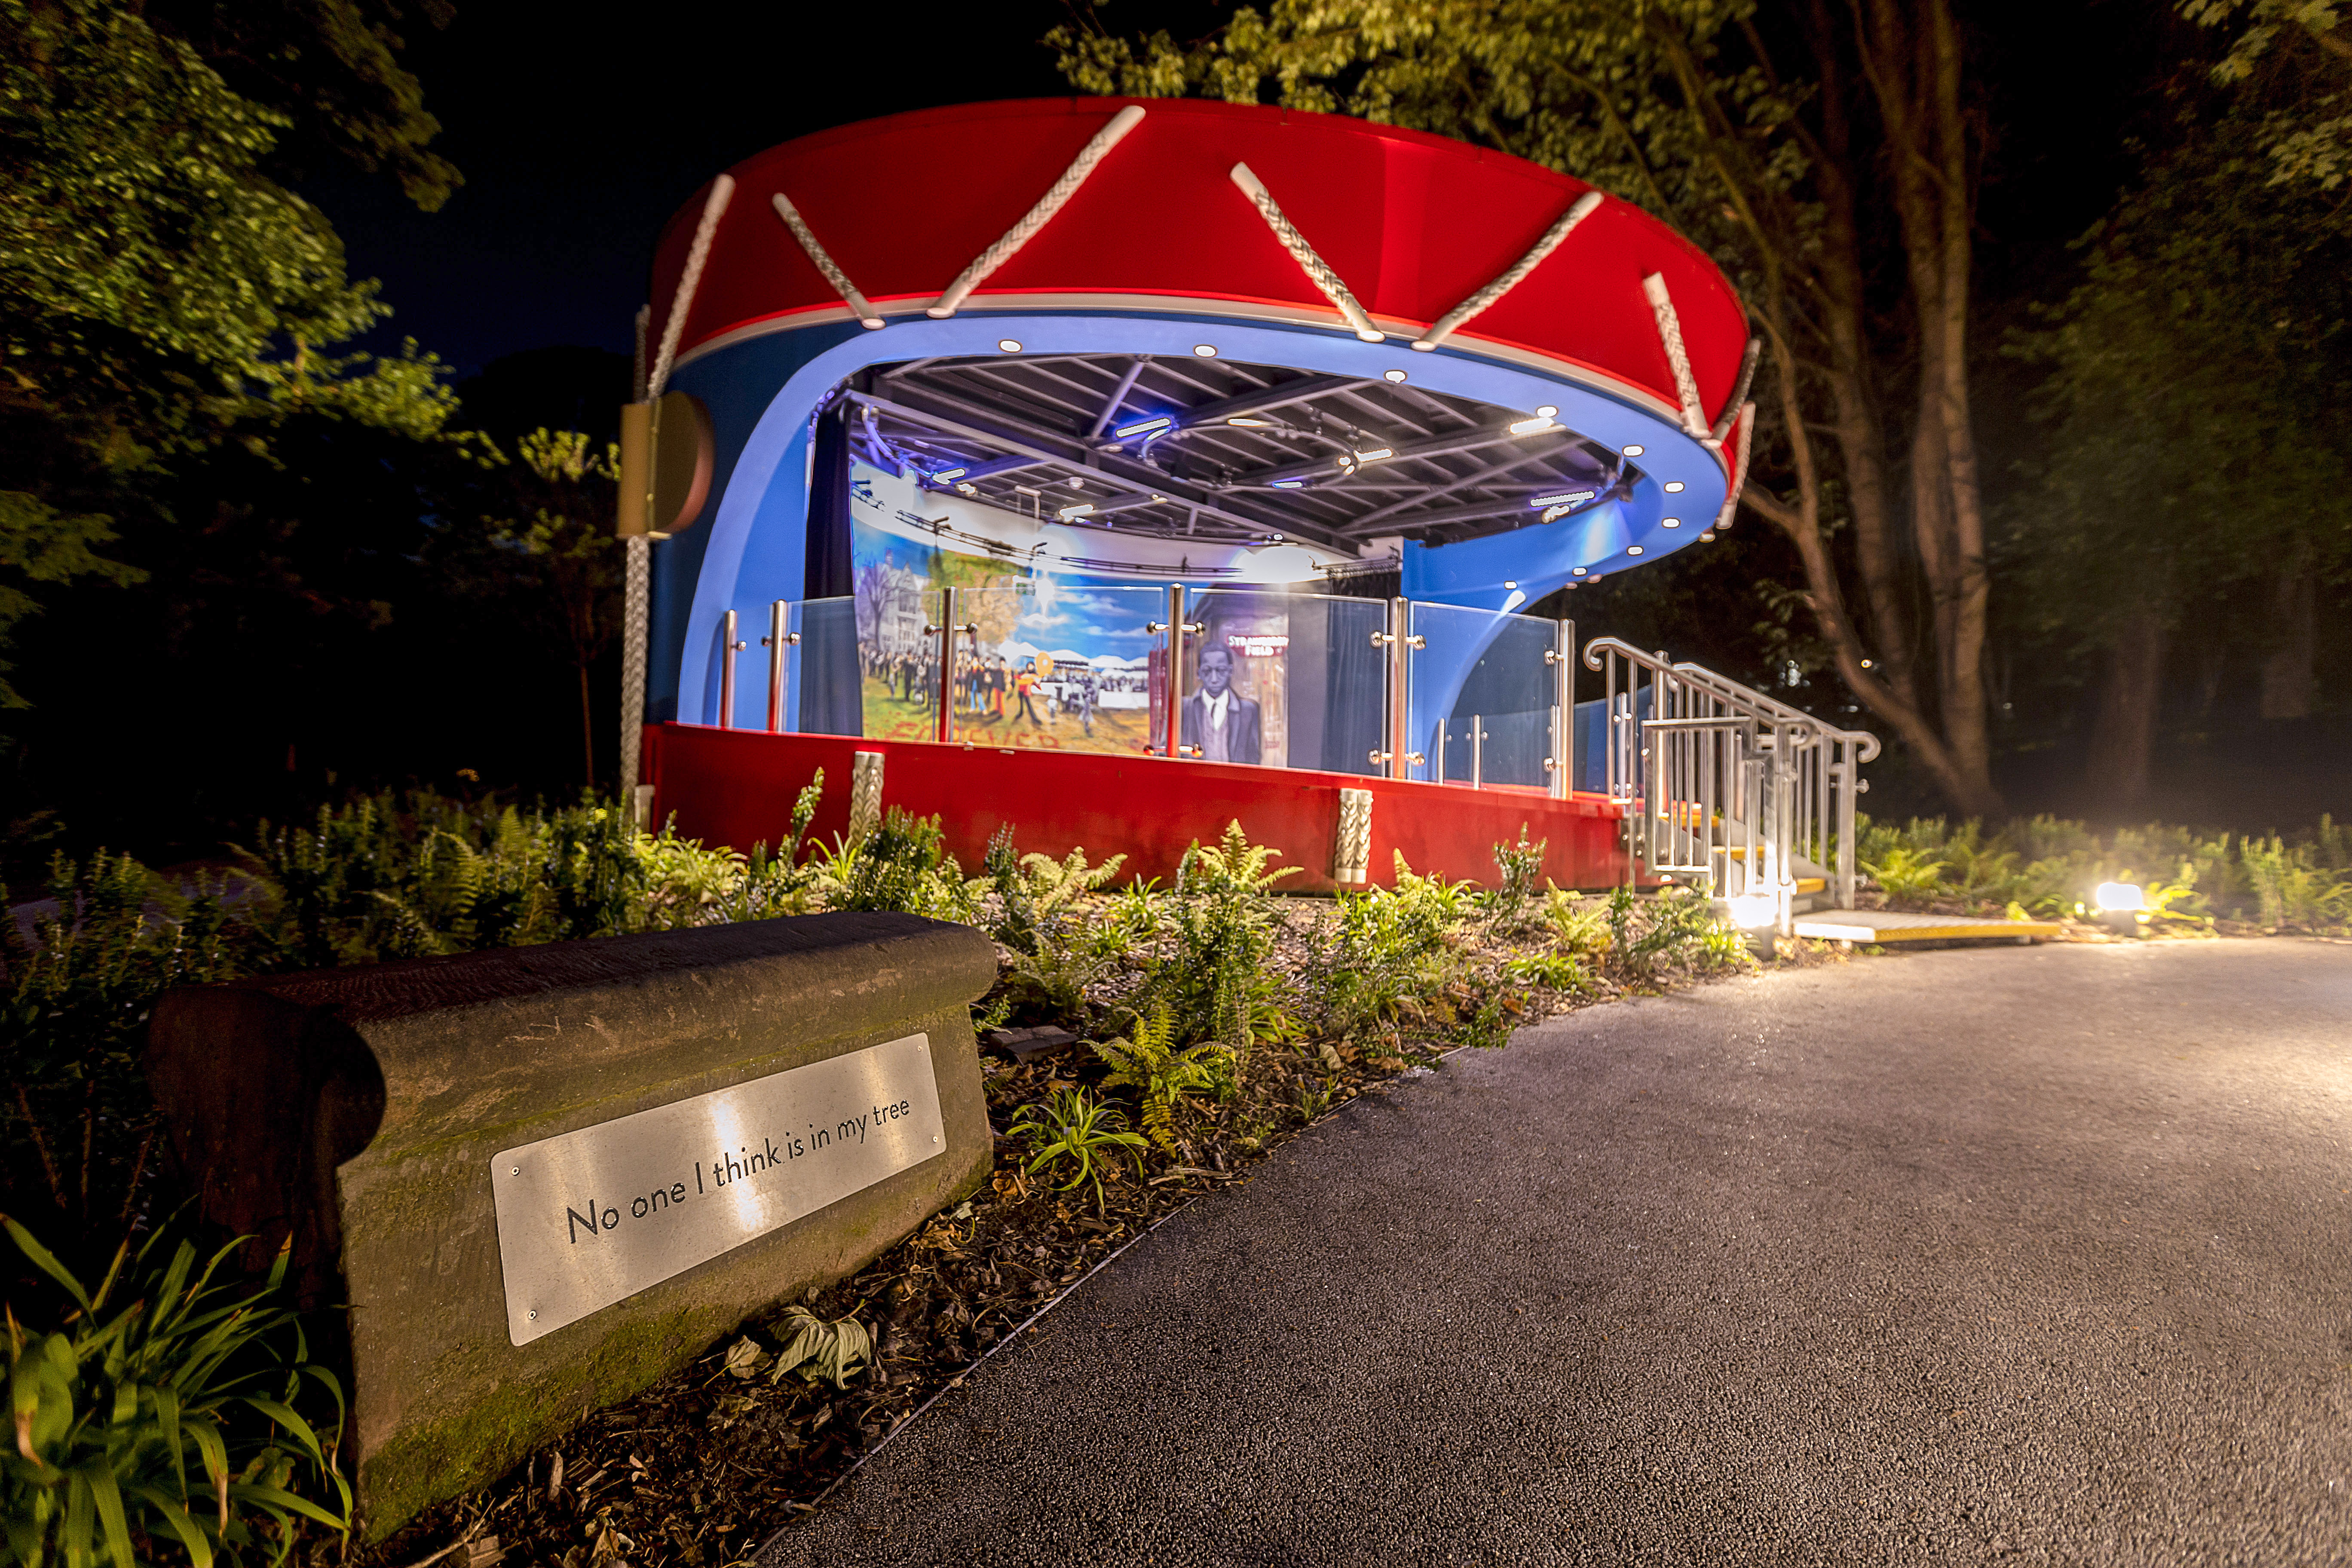 Strawberry Field Bandstand at night.
(Photo Credit: Dextra Group)